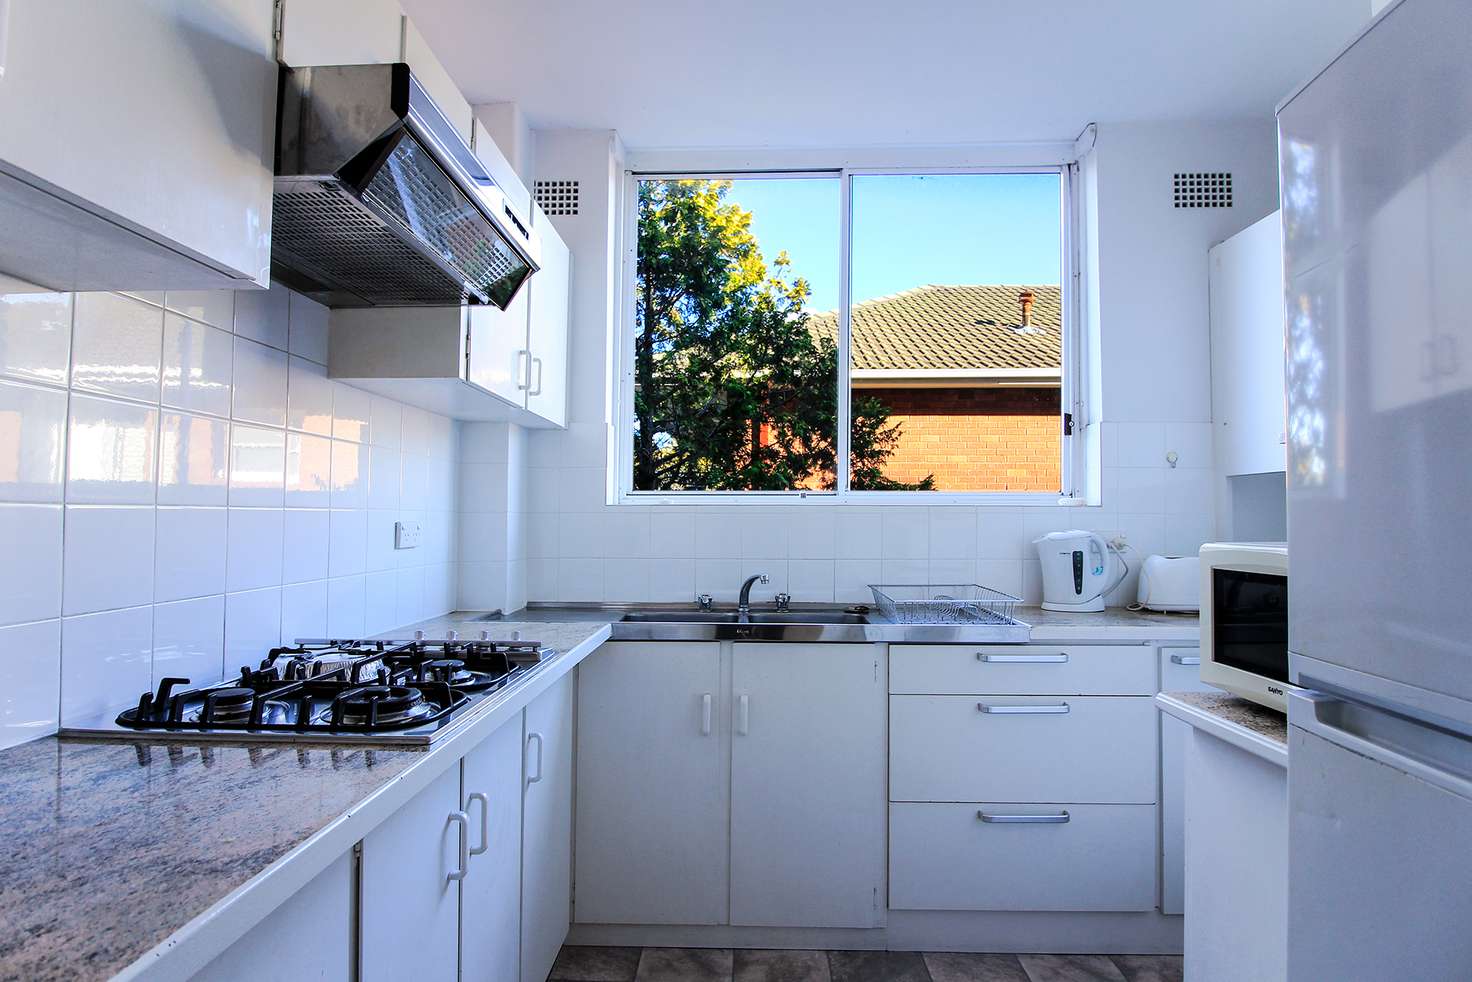 Main view of Homely apartment listing, 4/106 Condamine street, Balgowlah NSW 2093